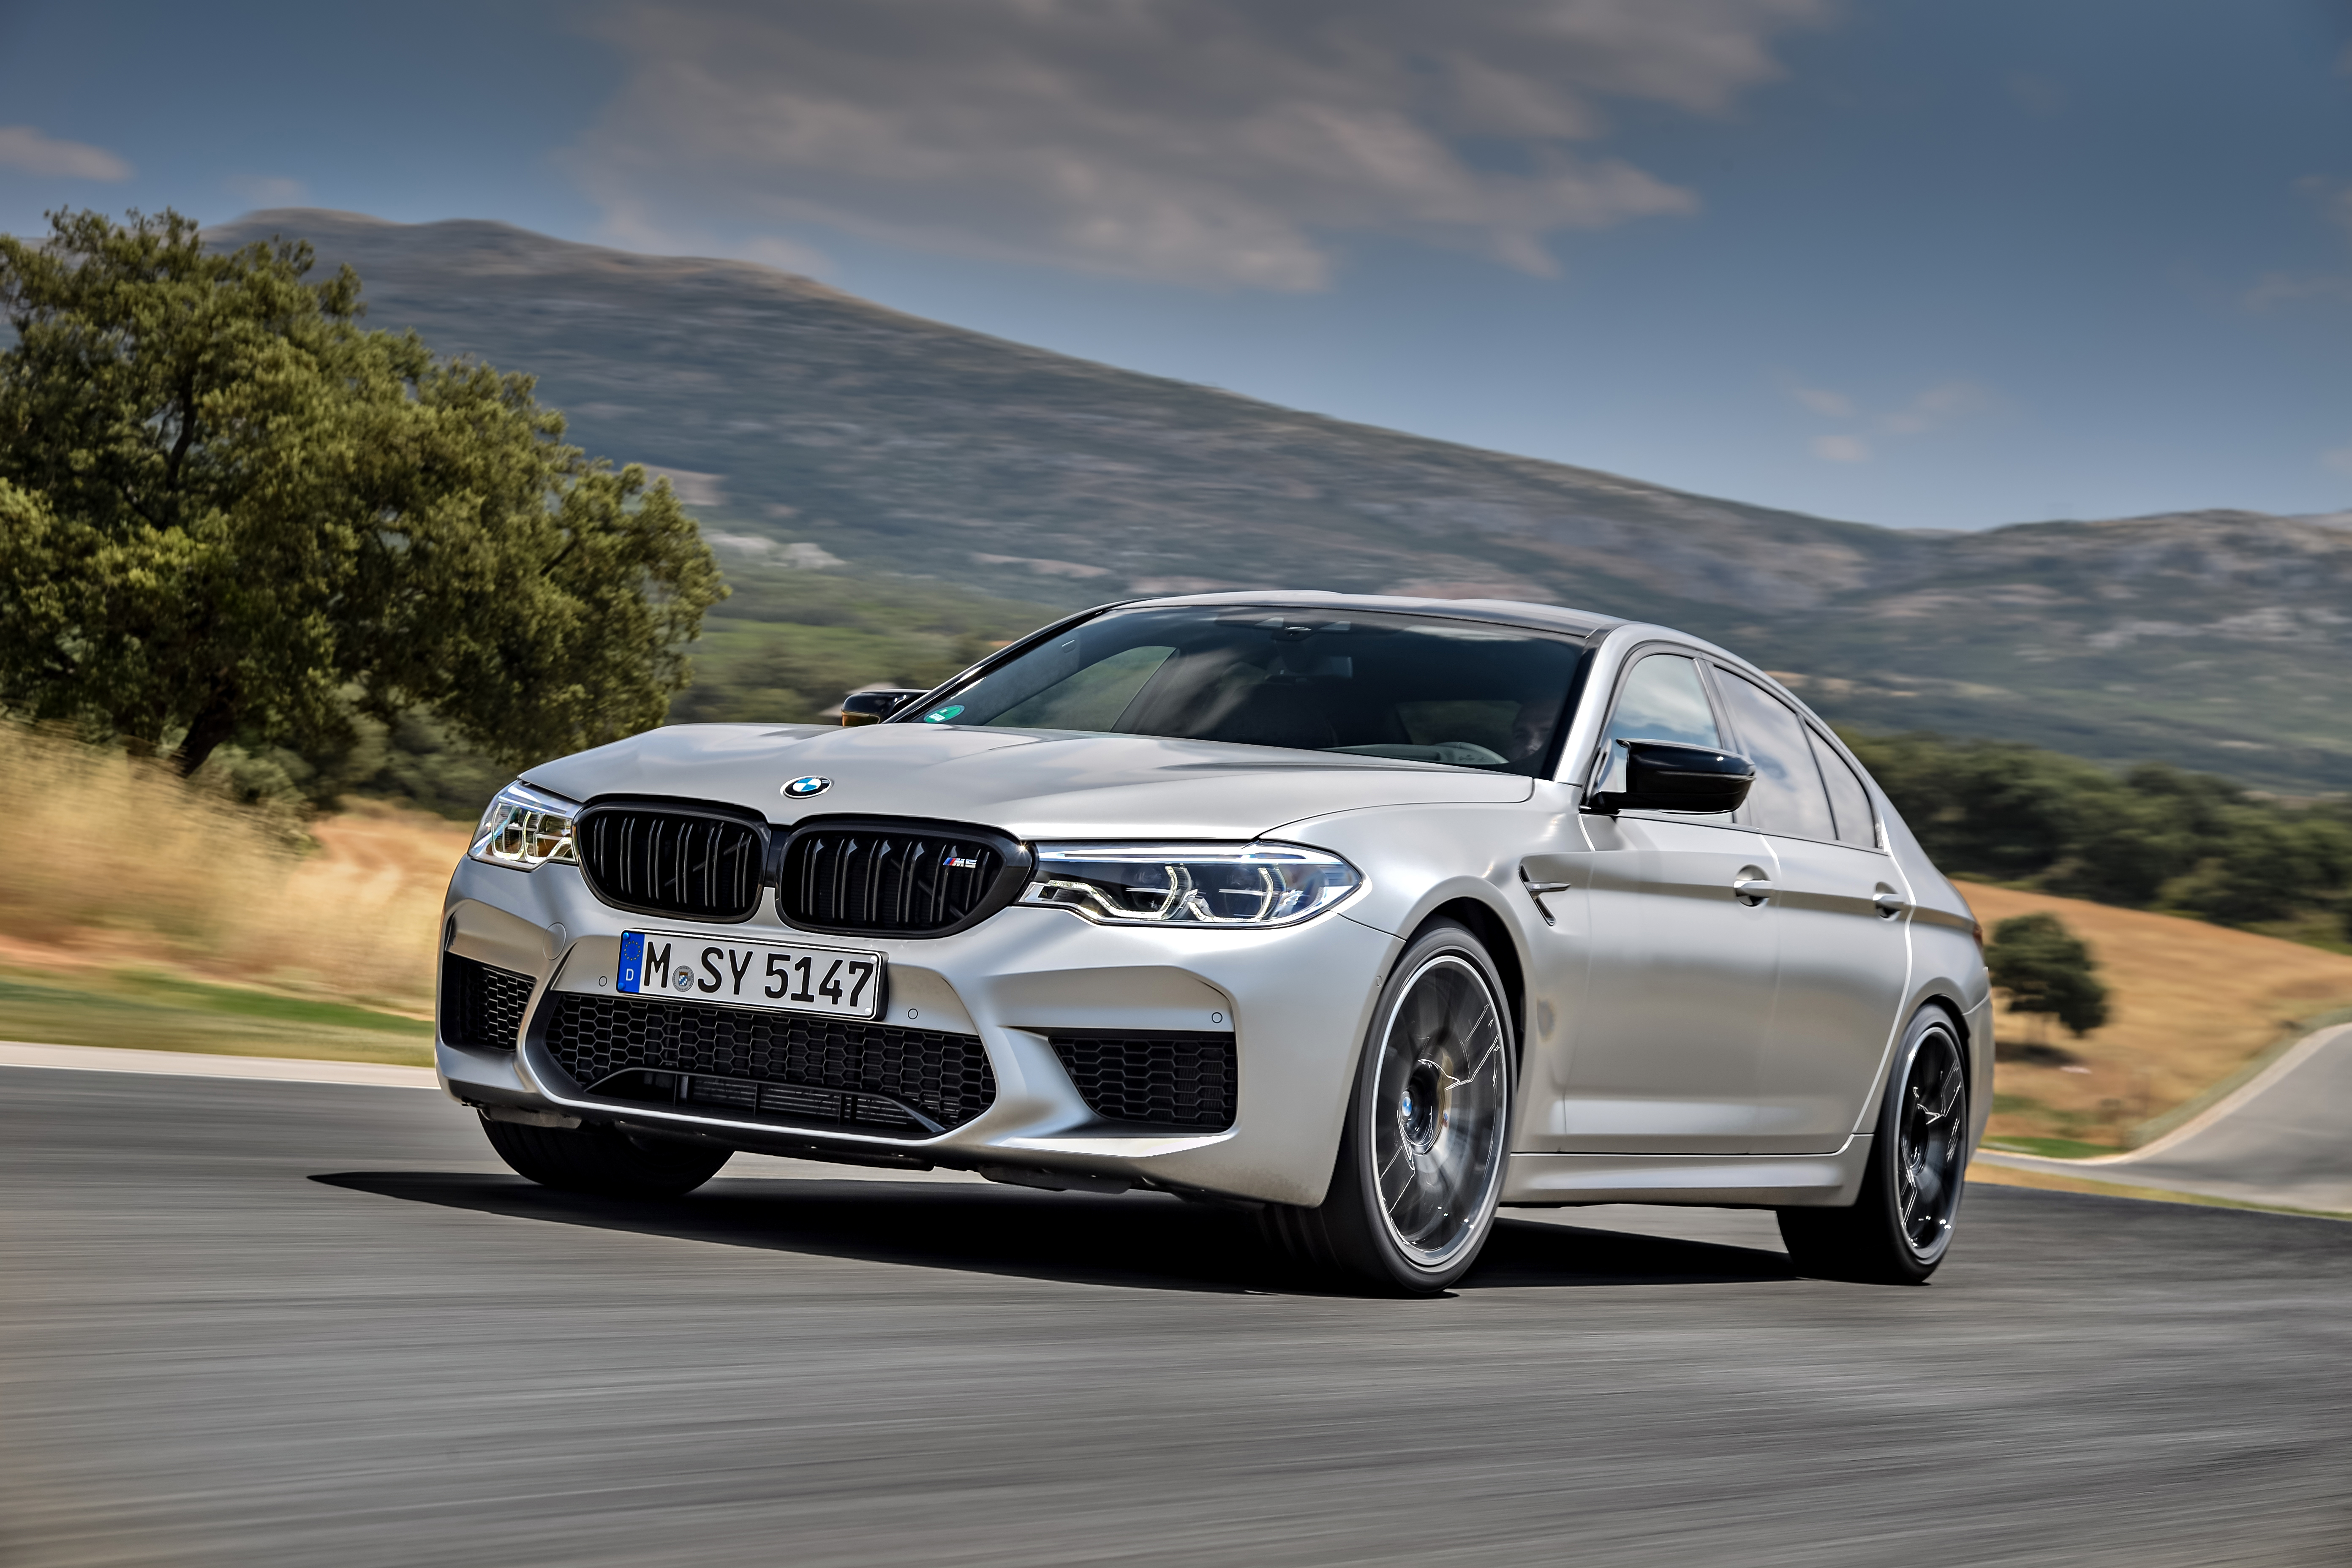 The Competition receives a range of upgrades over the regular M5